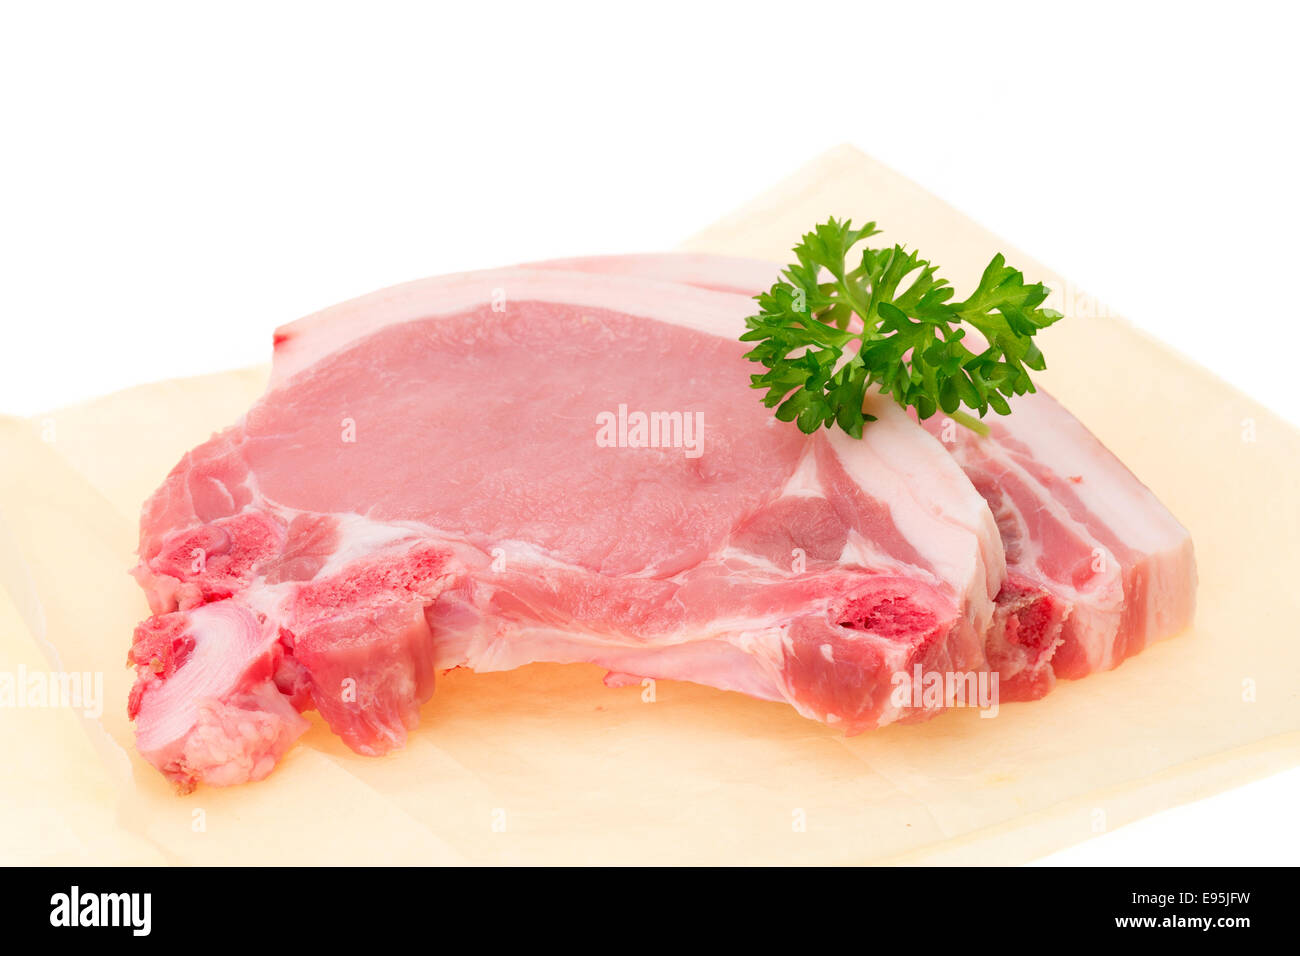 Two pork loin chops close-up, studio isolated Stock Photo